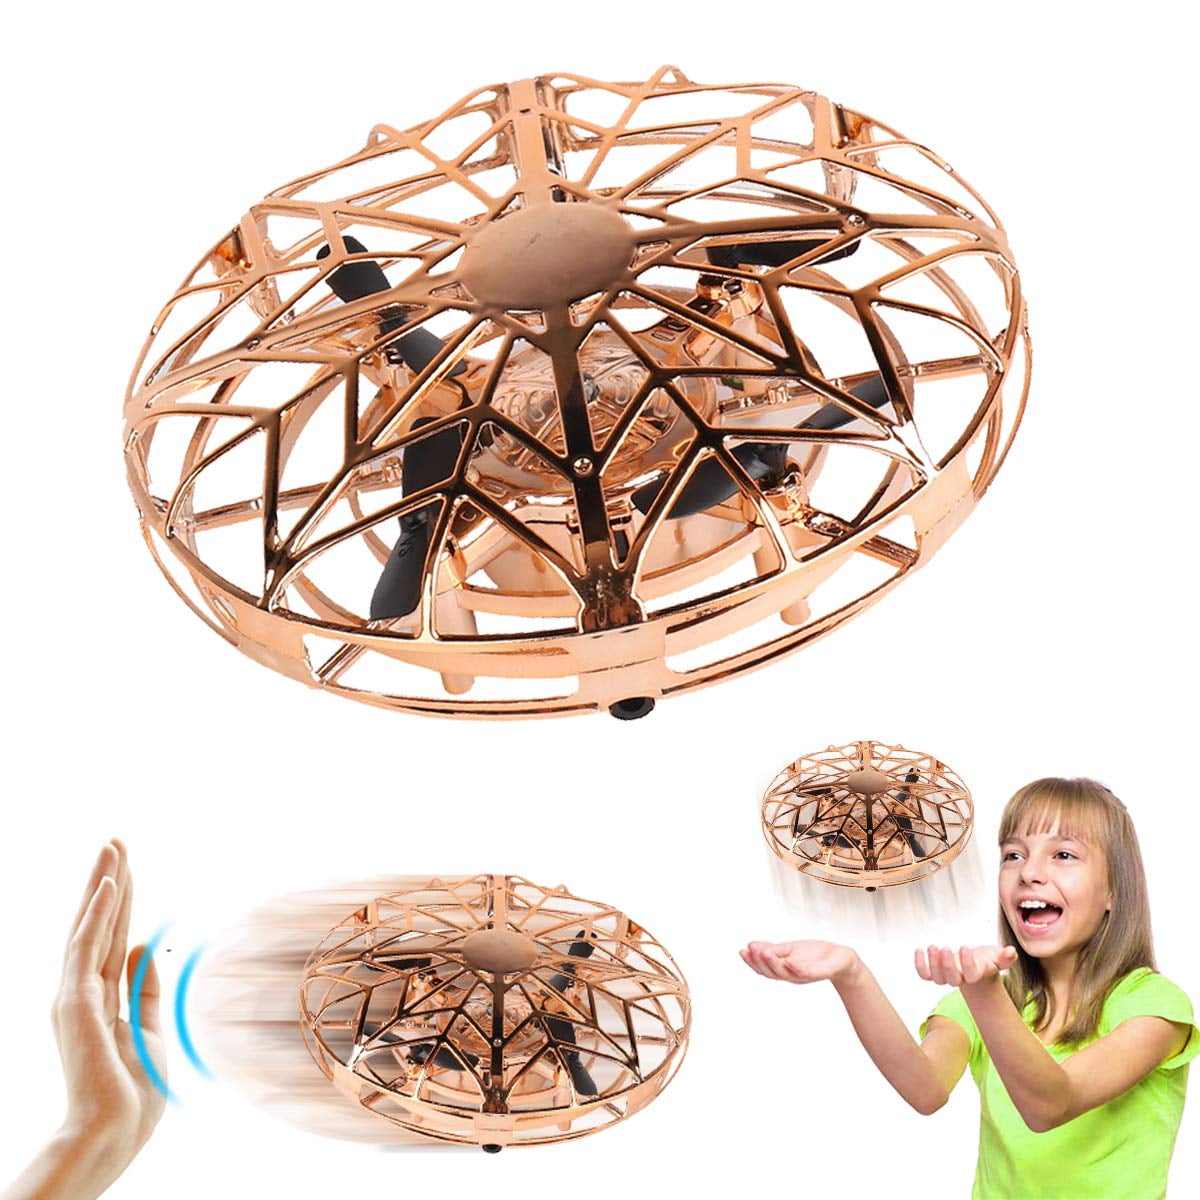 Rechargeable Light Up Drone Flying Ball RC Toys,Cute Pig Flying RC Toy for Kids Boys Girls Gifts Infrared Induction Helicopter with Remote Controller for Indoor and Outdoor Games Multicolor 